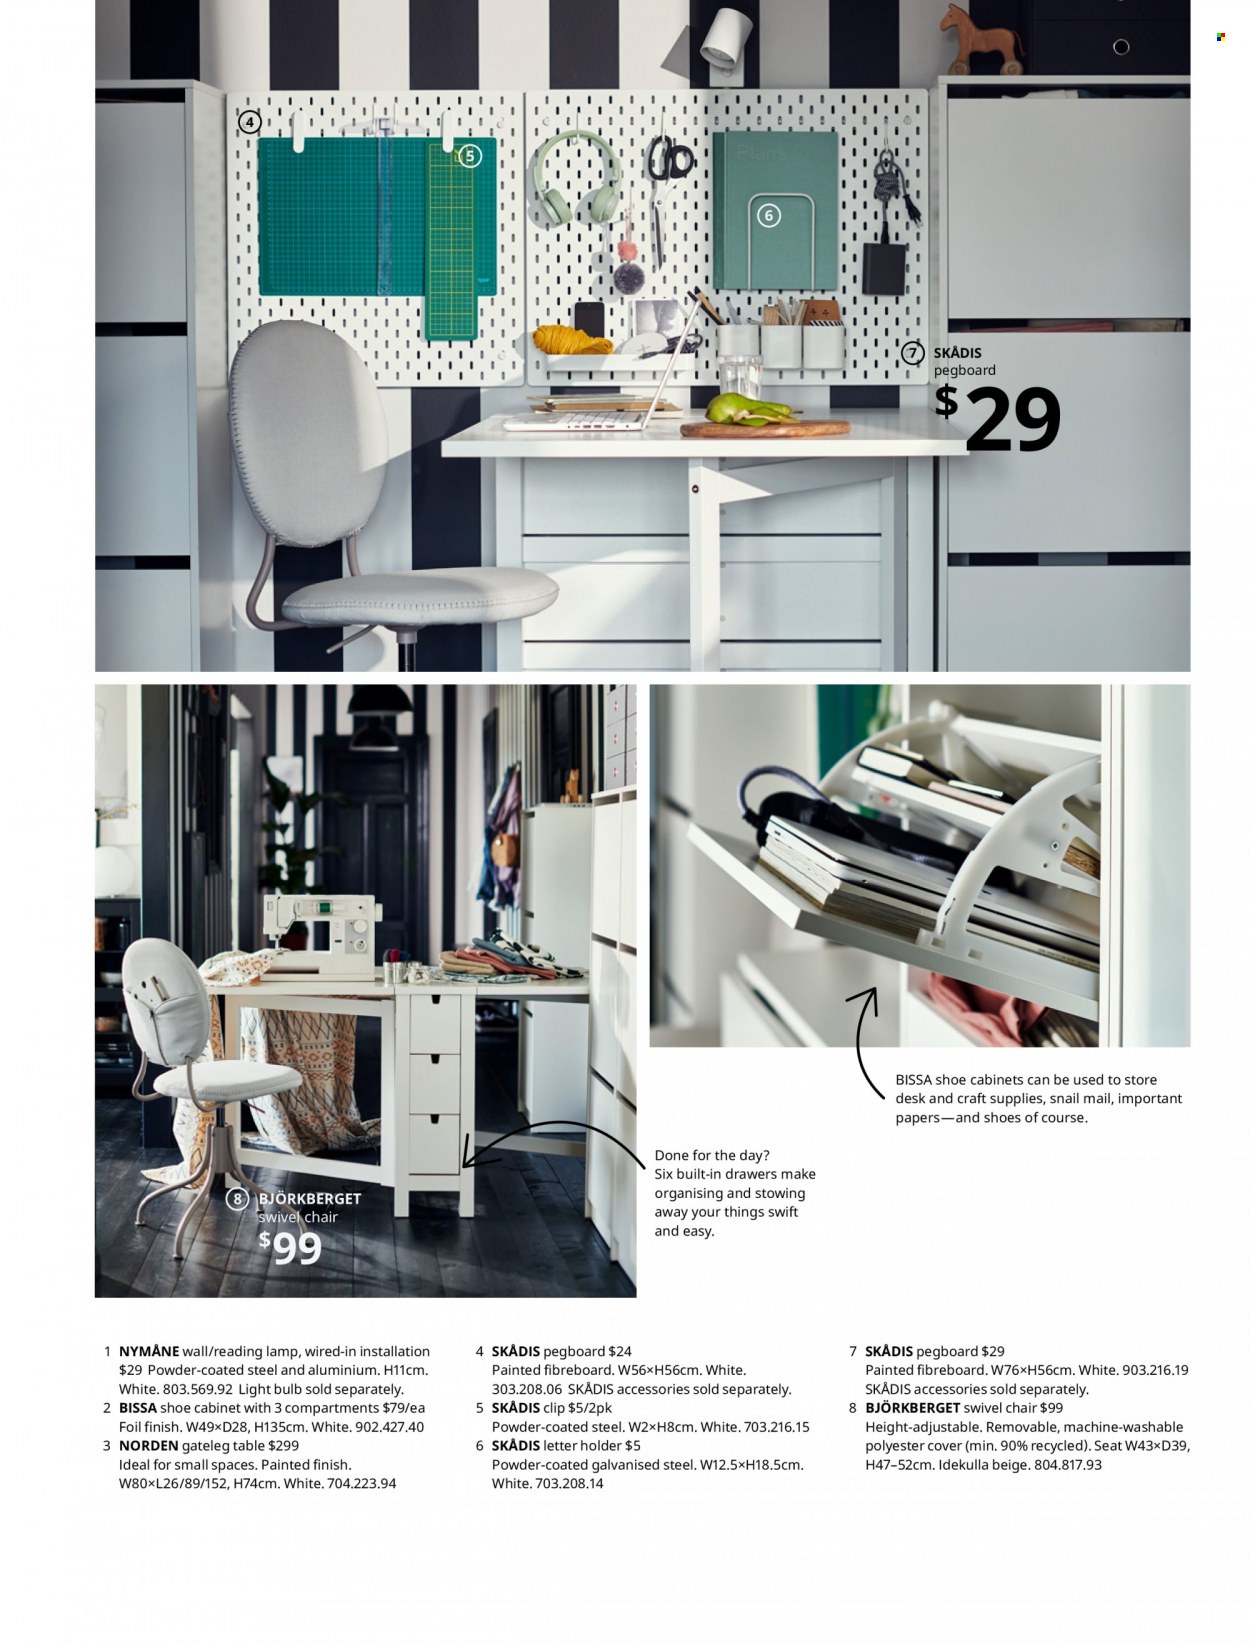 thumbnail - IKEA Catalogue - Sales products - cabinet, table, chair, swivel chair, shoe cabinet, desk, pegboard, holder, craft supplies, light bulb. Page 15.